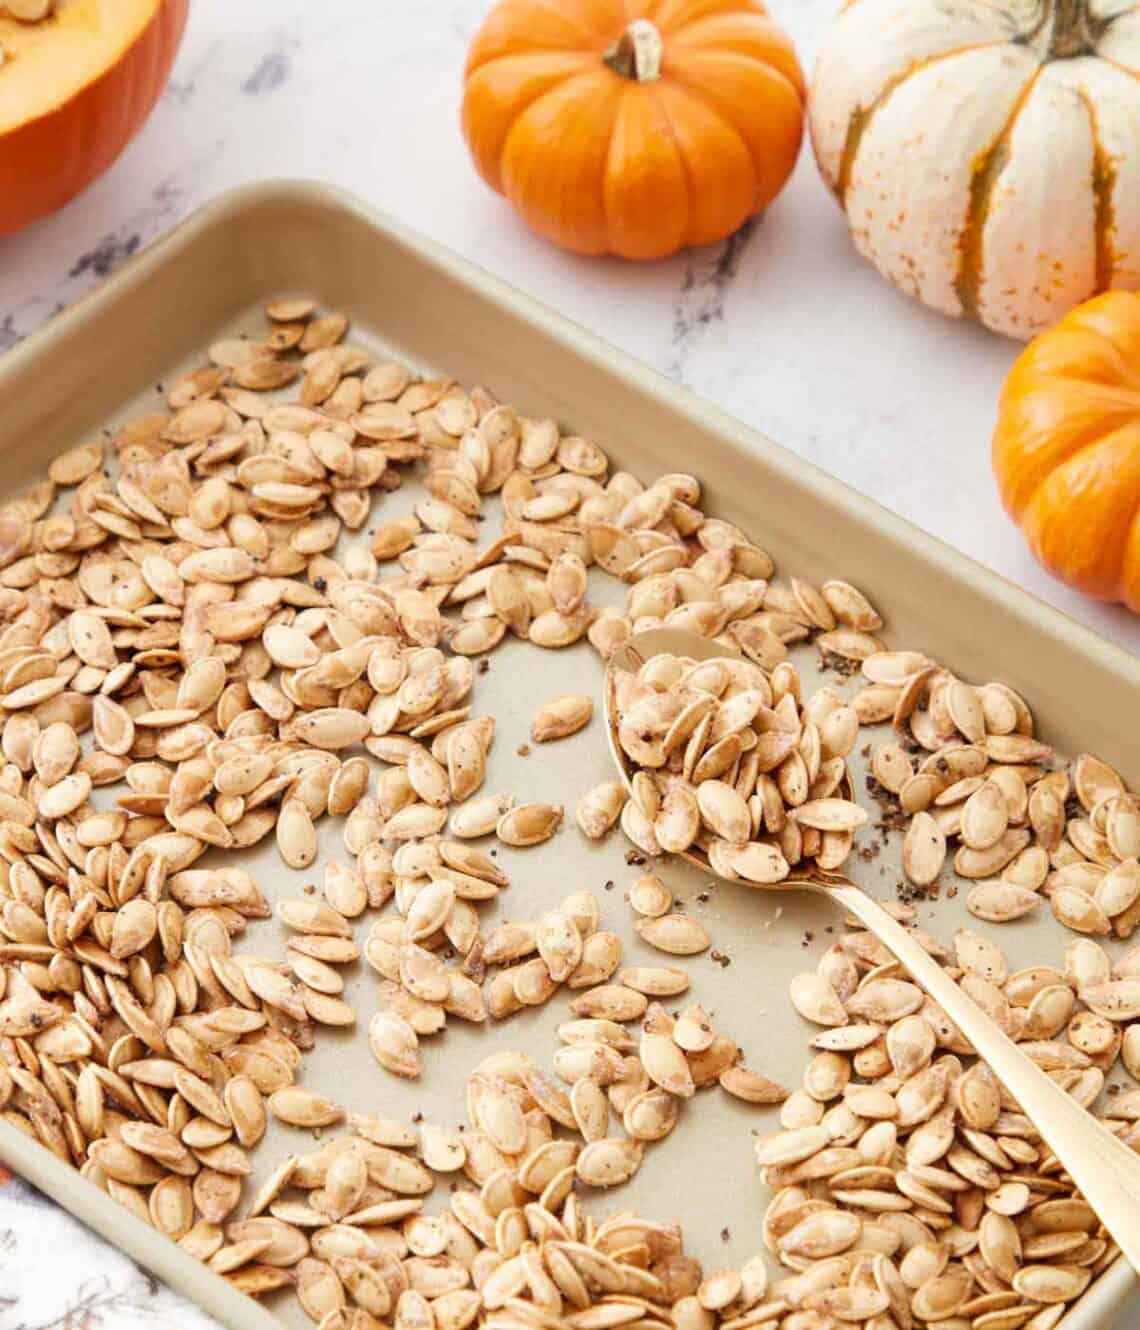 A sheet pan of roasted pumpkin seeds with a spoonful in the pan. Small pumpkins scattered around.